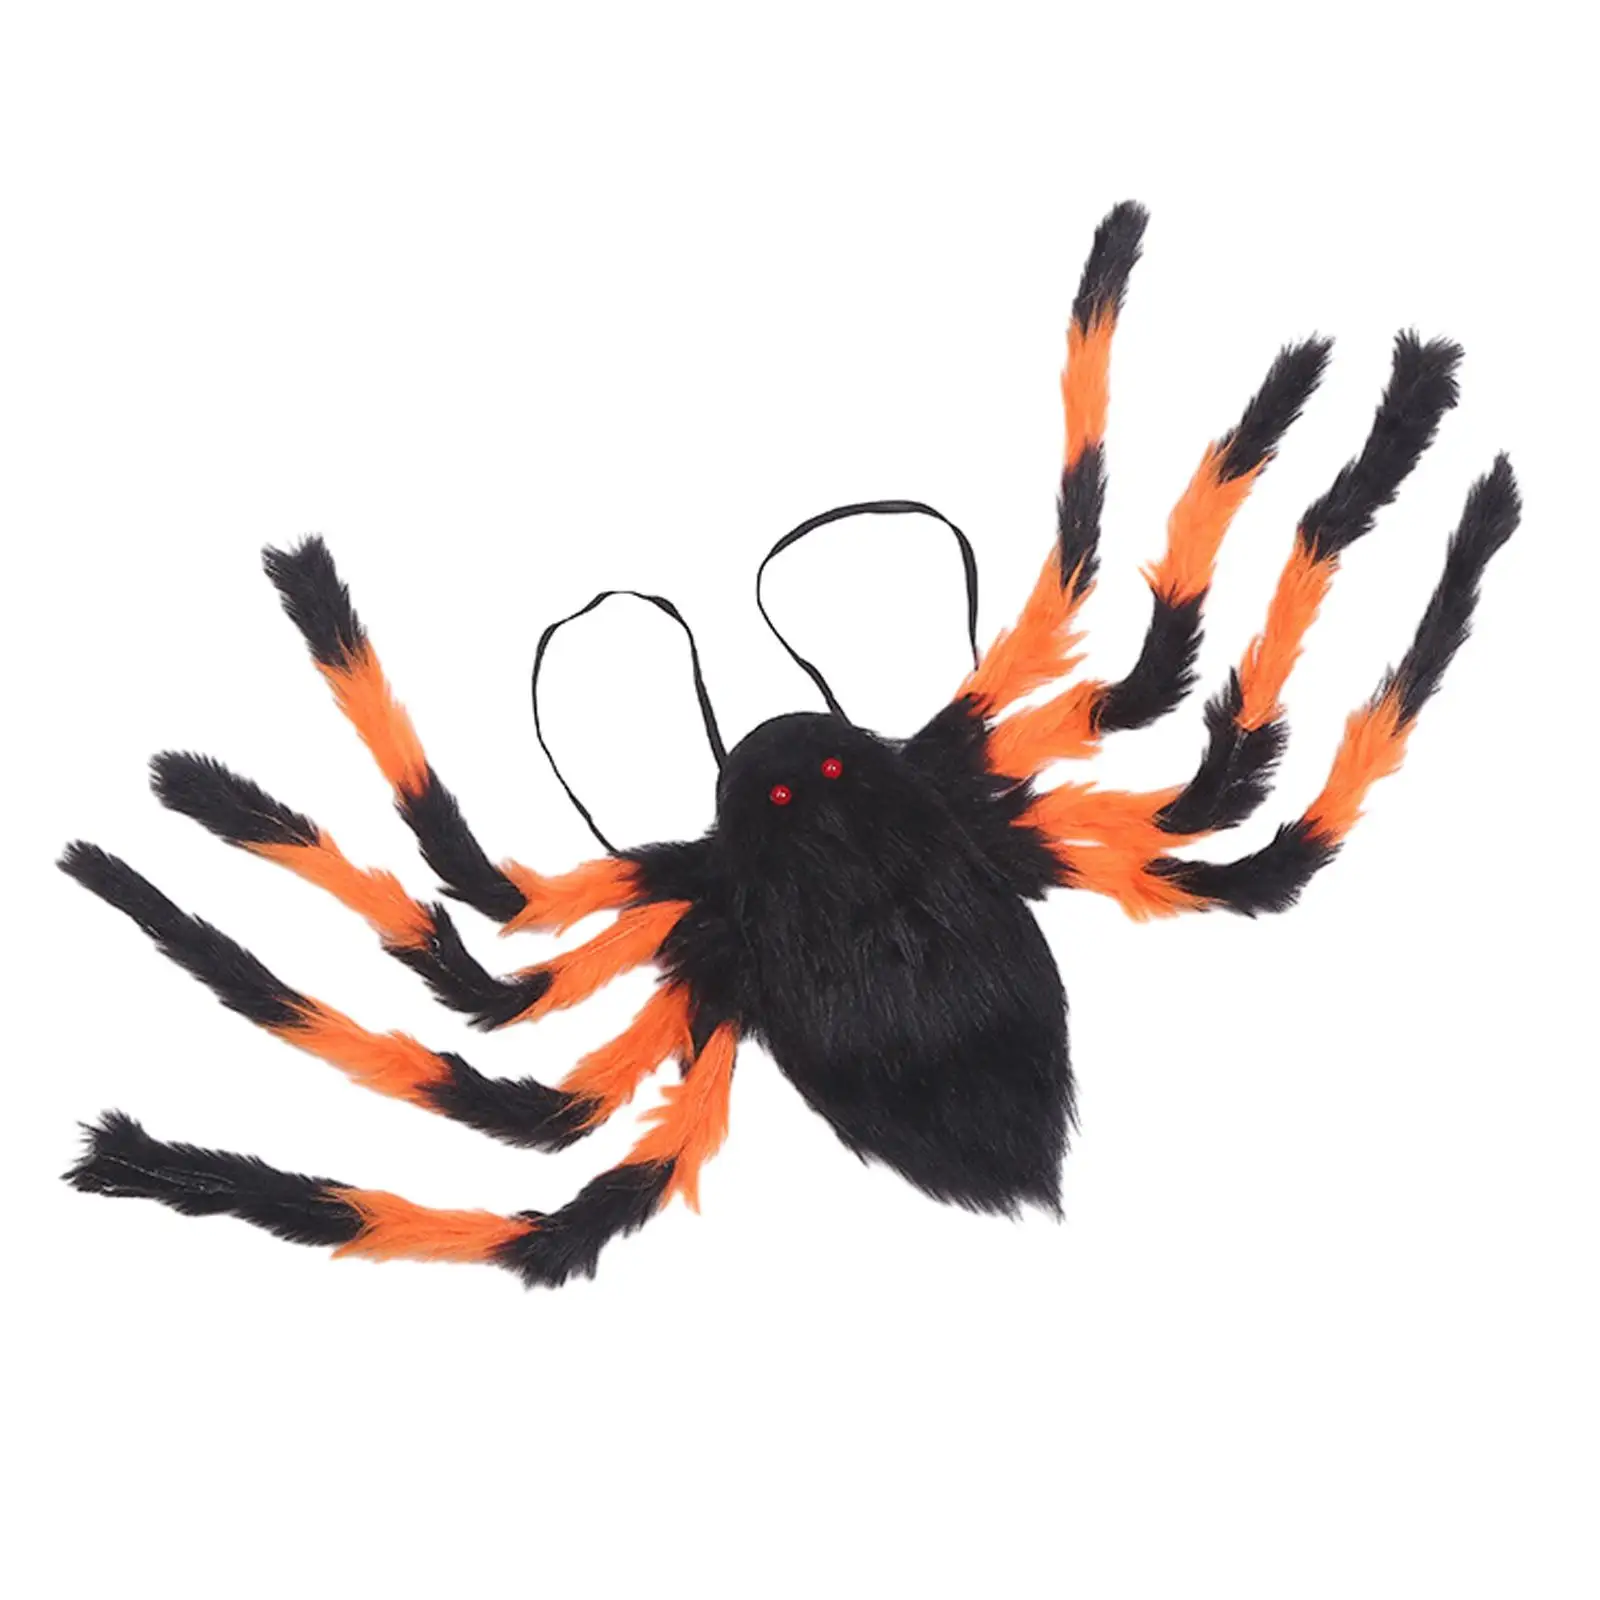 Halloween Spider Backpack Costume 8 Legs Horror Plush Spider Decoration for Haunted House Dress up Taking Picture Carnival